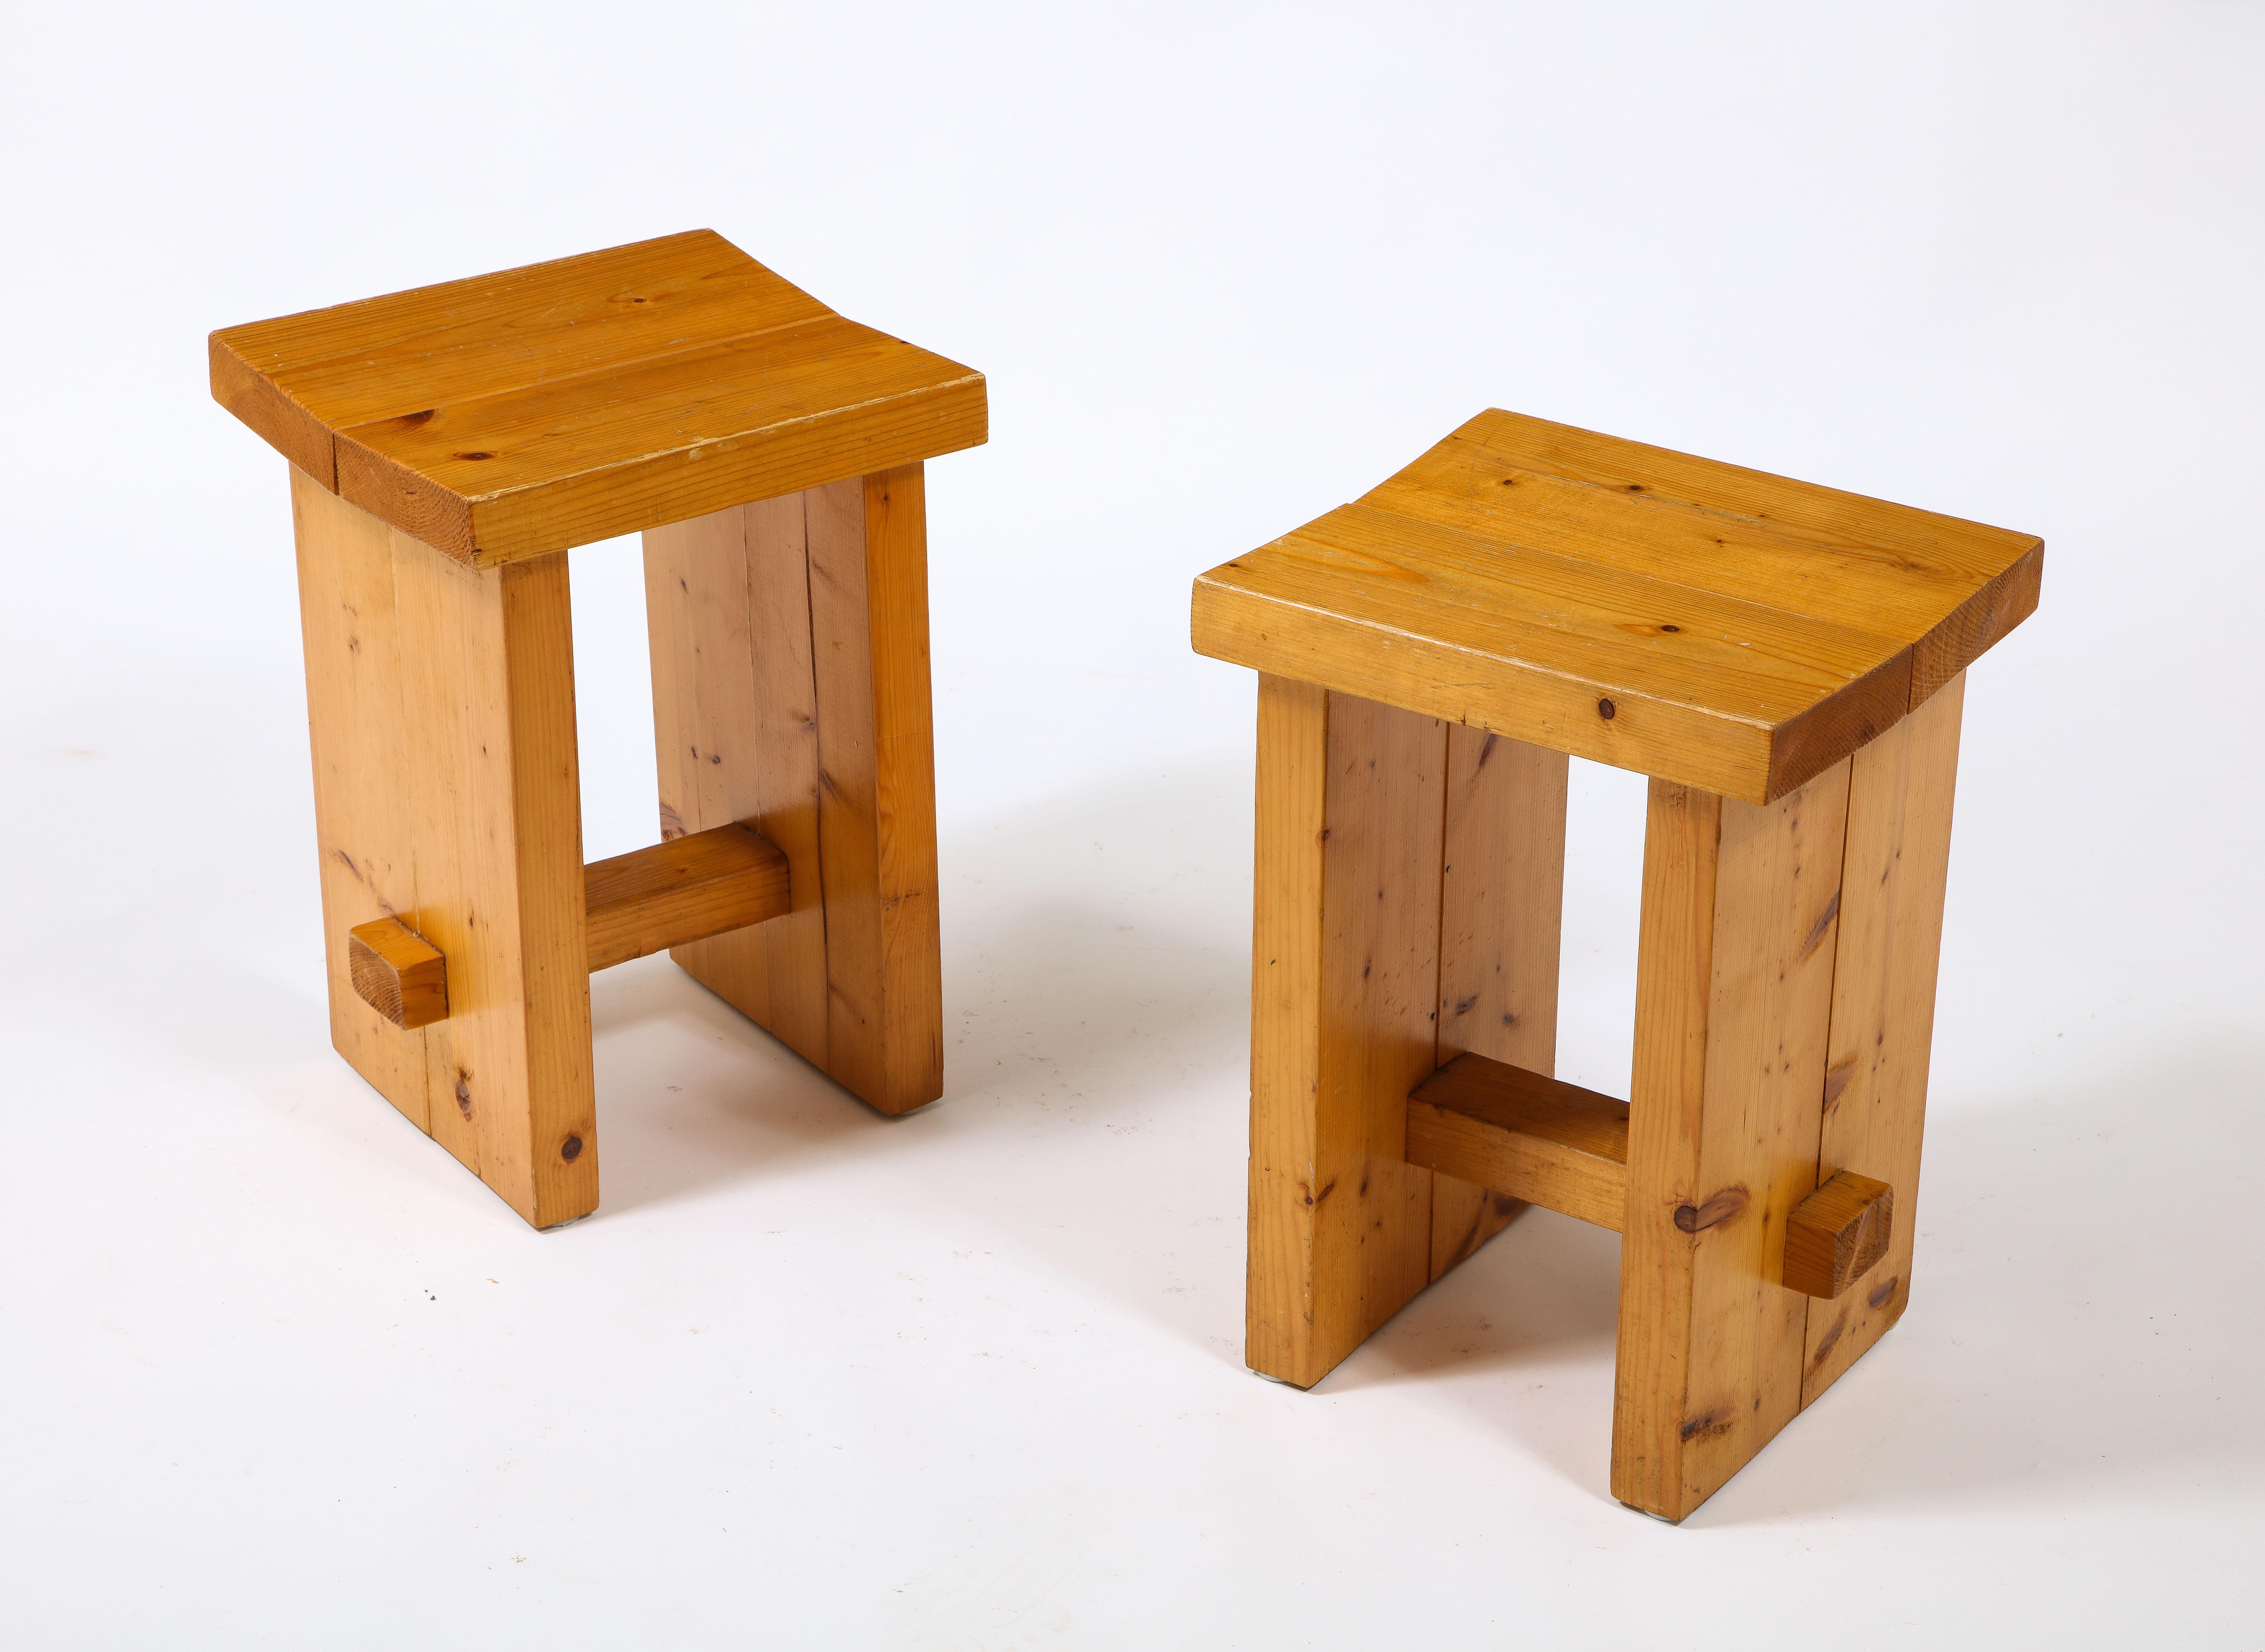 Reminiscent of the work of Perriand, these pine stools are very sturdy and practical.